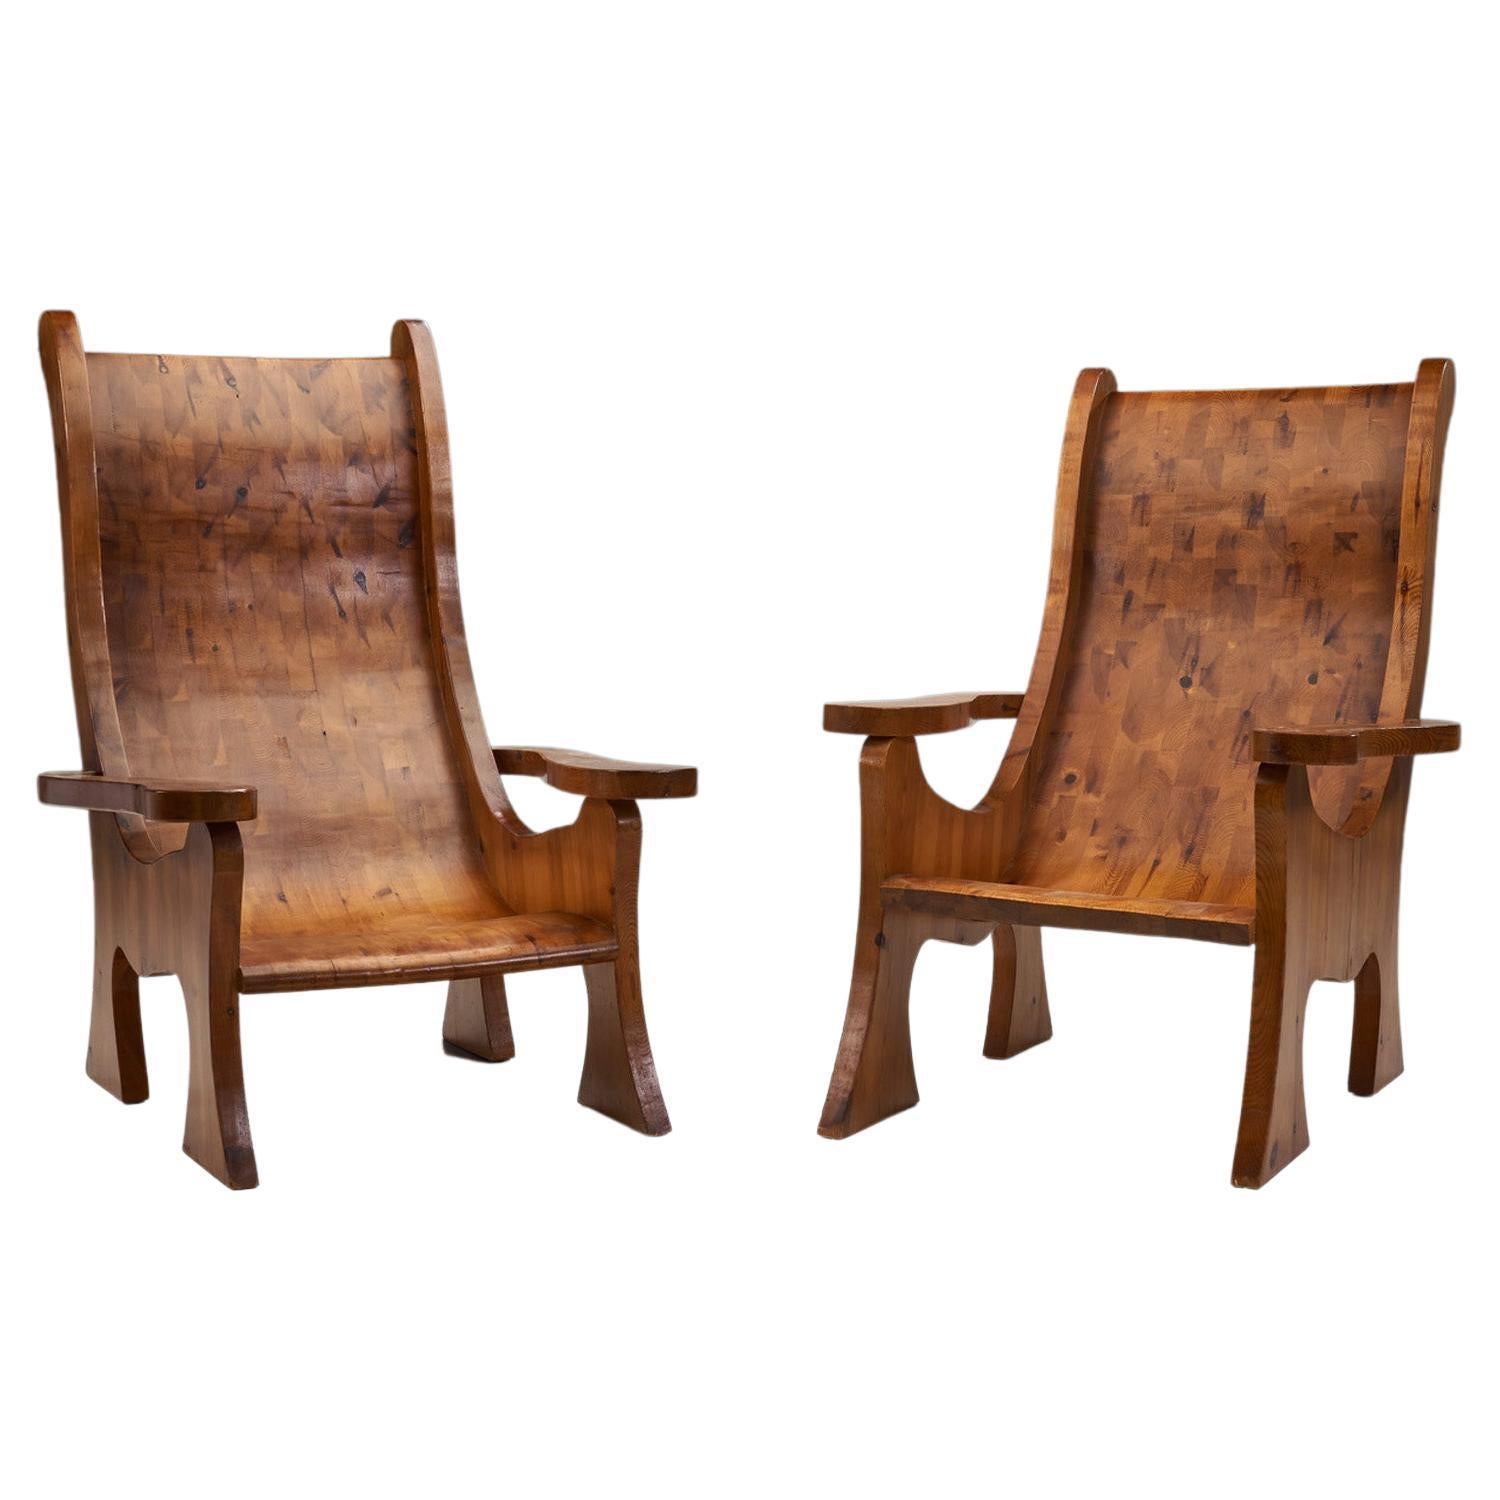 Sculptural Solid Wood Armchairs, Europe ca 1960s